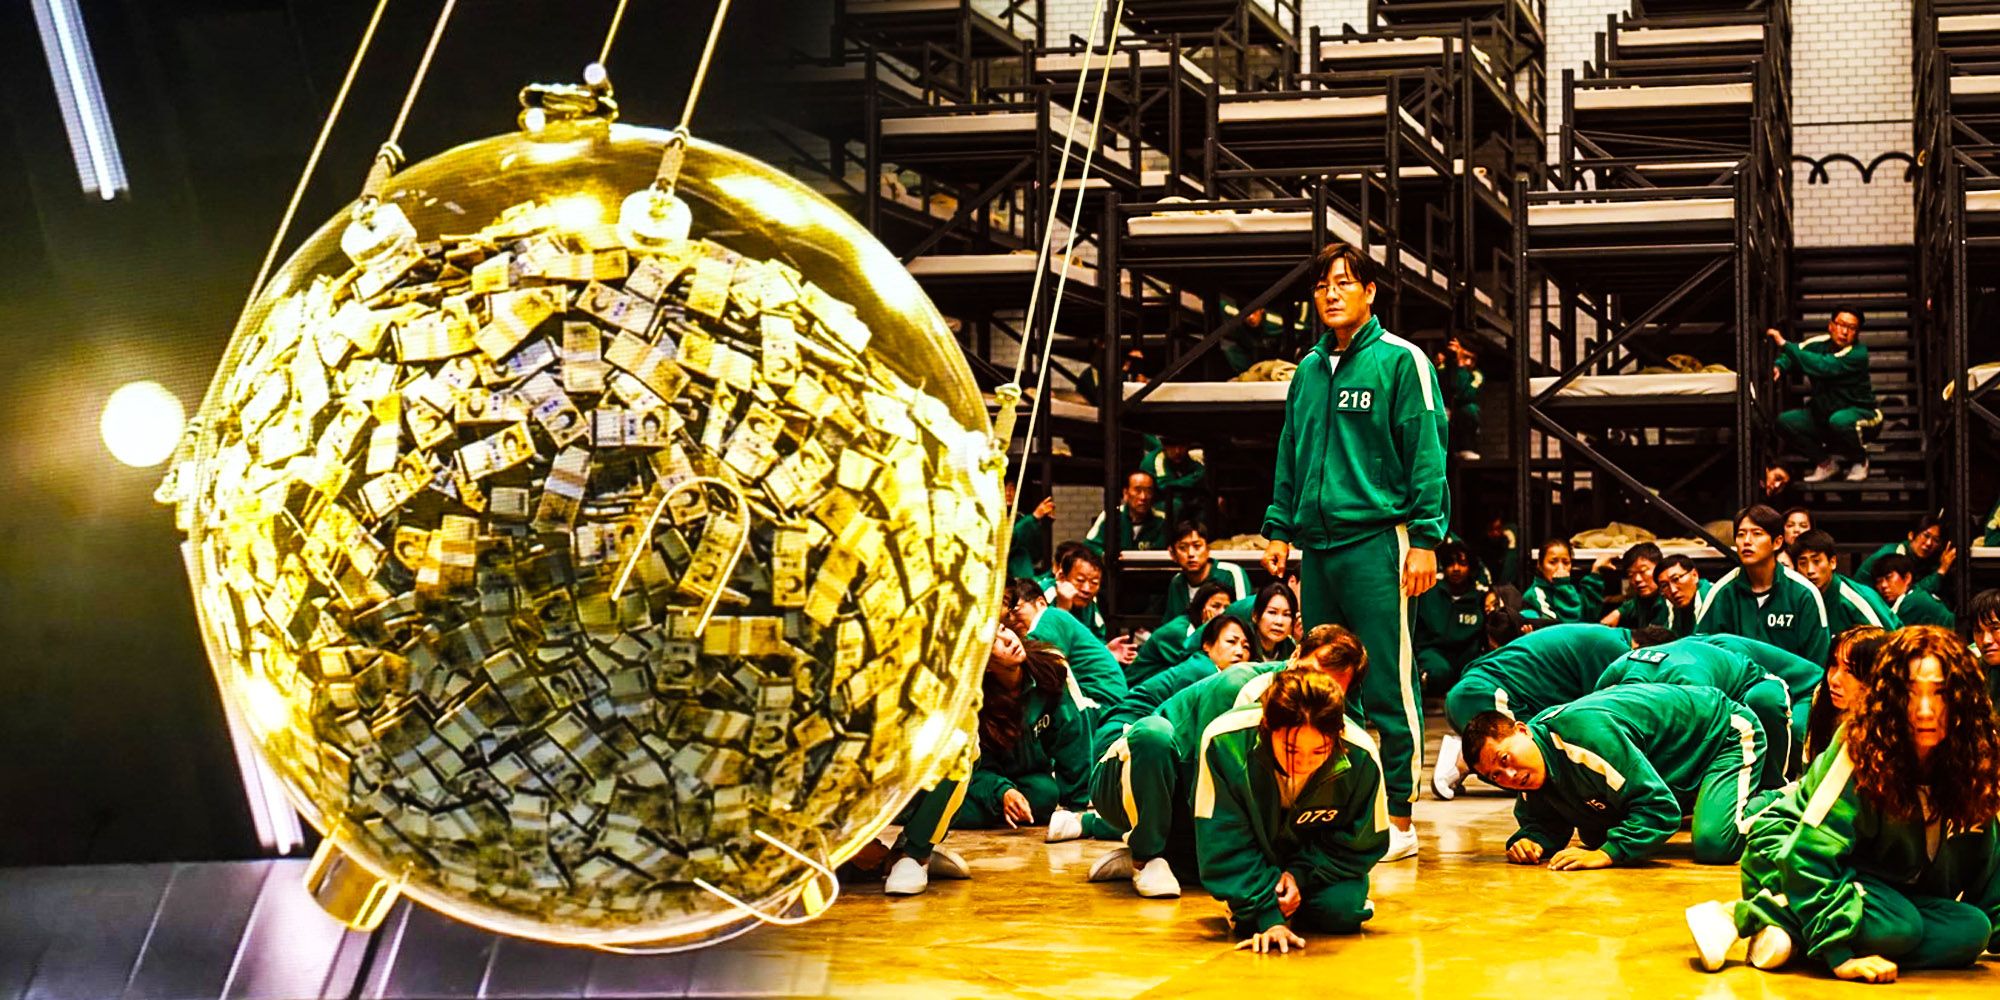 A blended image features the case of prize money and the players in their jumpsuits on the floor in Squid Game